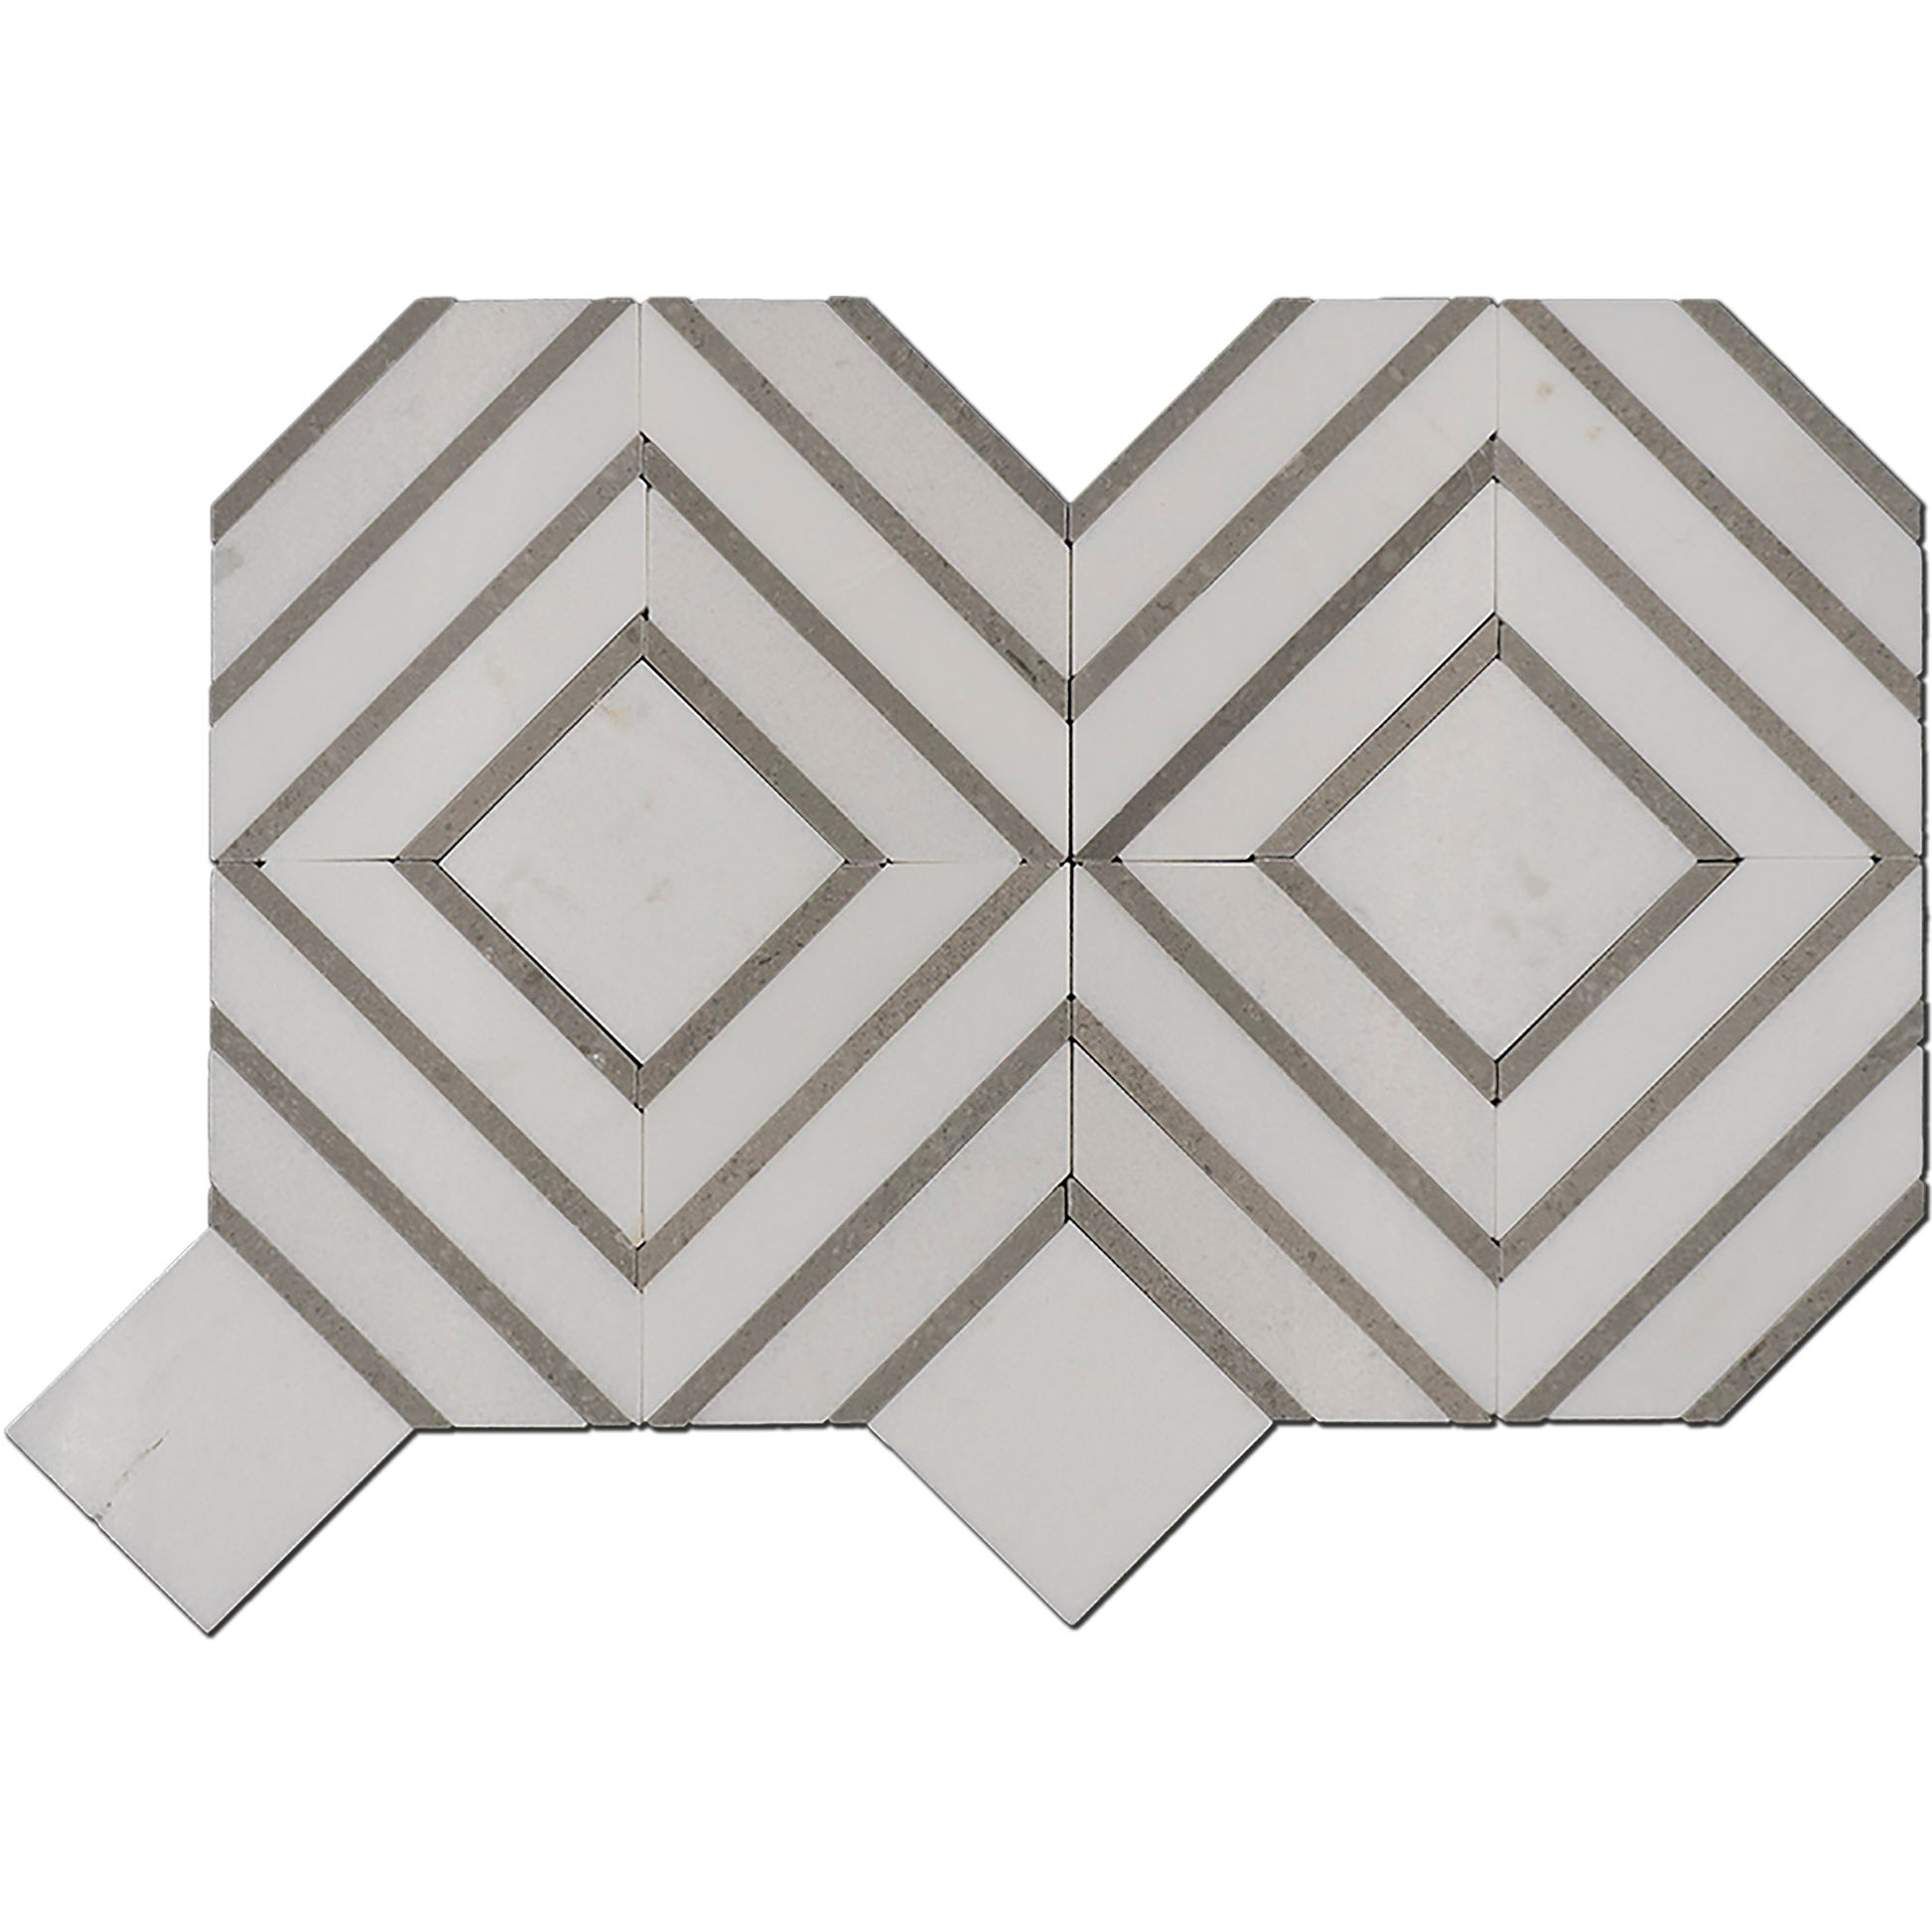 Trove Thassos W/ Grey R Marble  - Polished Floor and Wall Mosaic